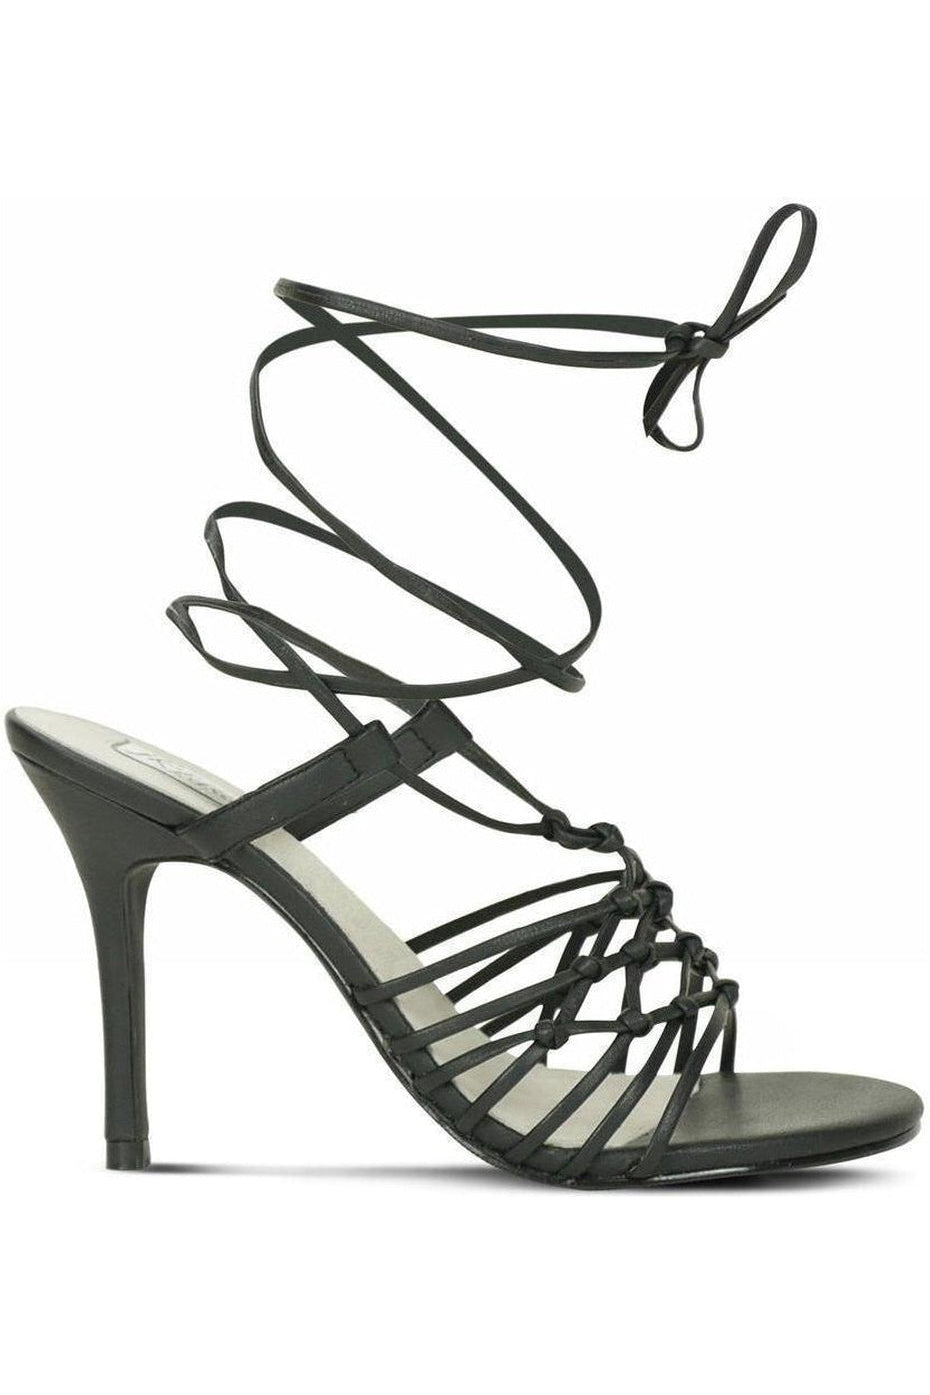 Sexy-9721 Strappy Leg Wrap Sandal | Black Leather-Sexyshoes Brand-Sandals-SEXYSHOES.COM